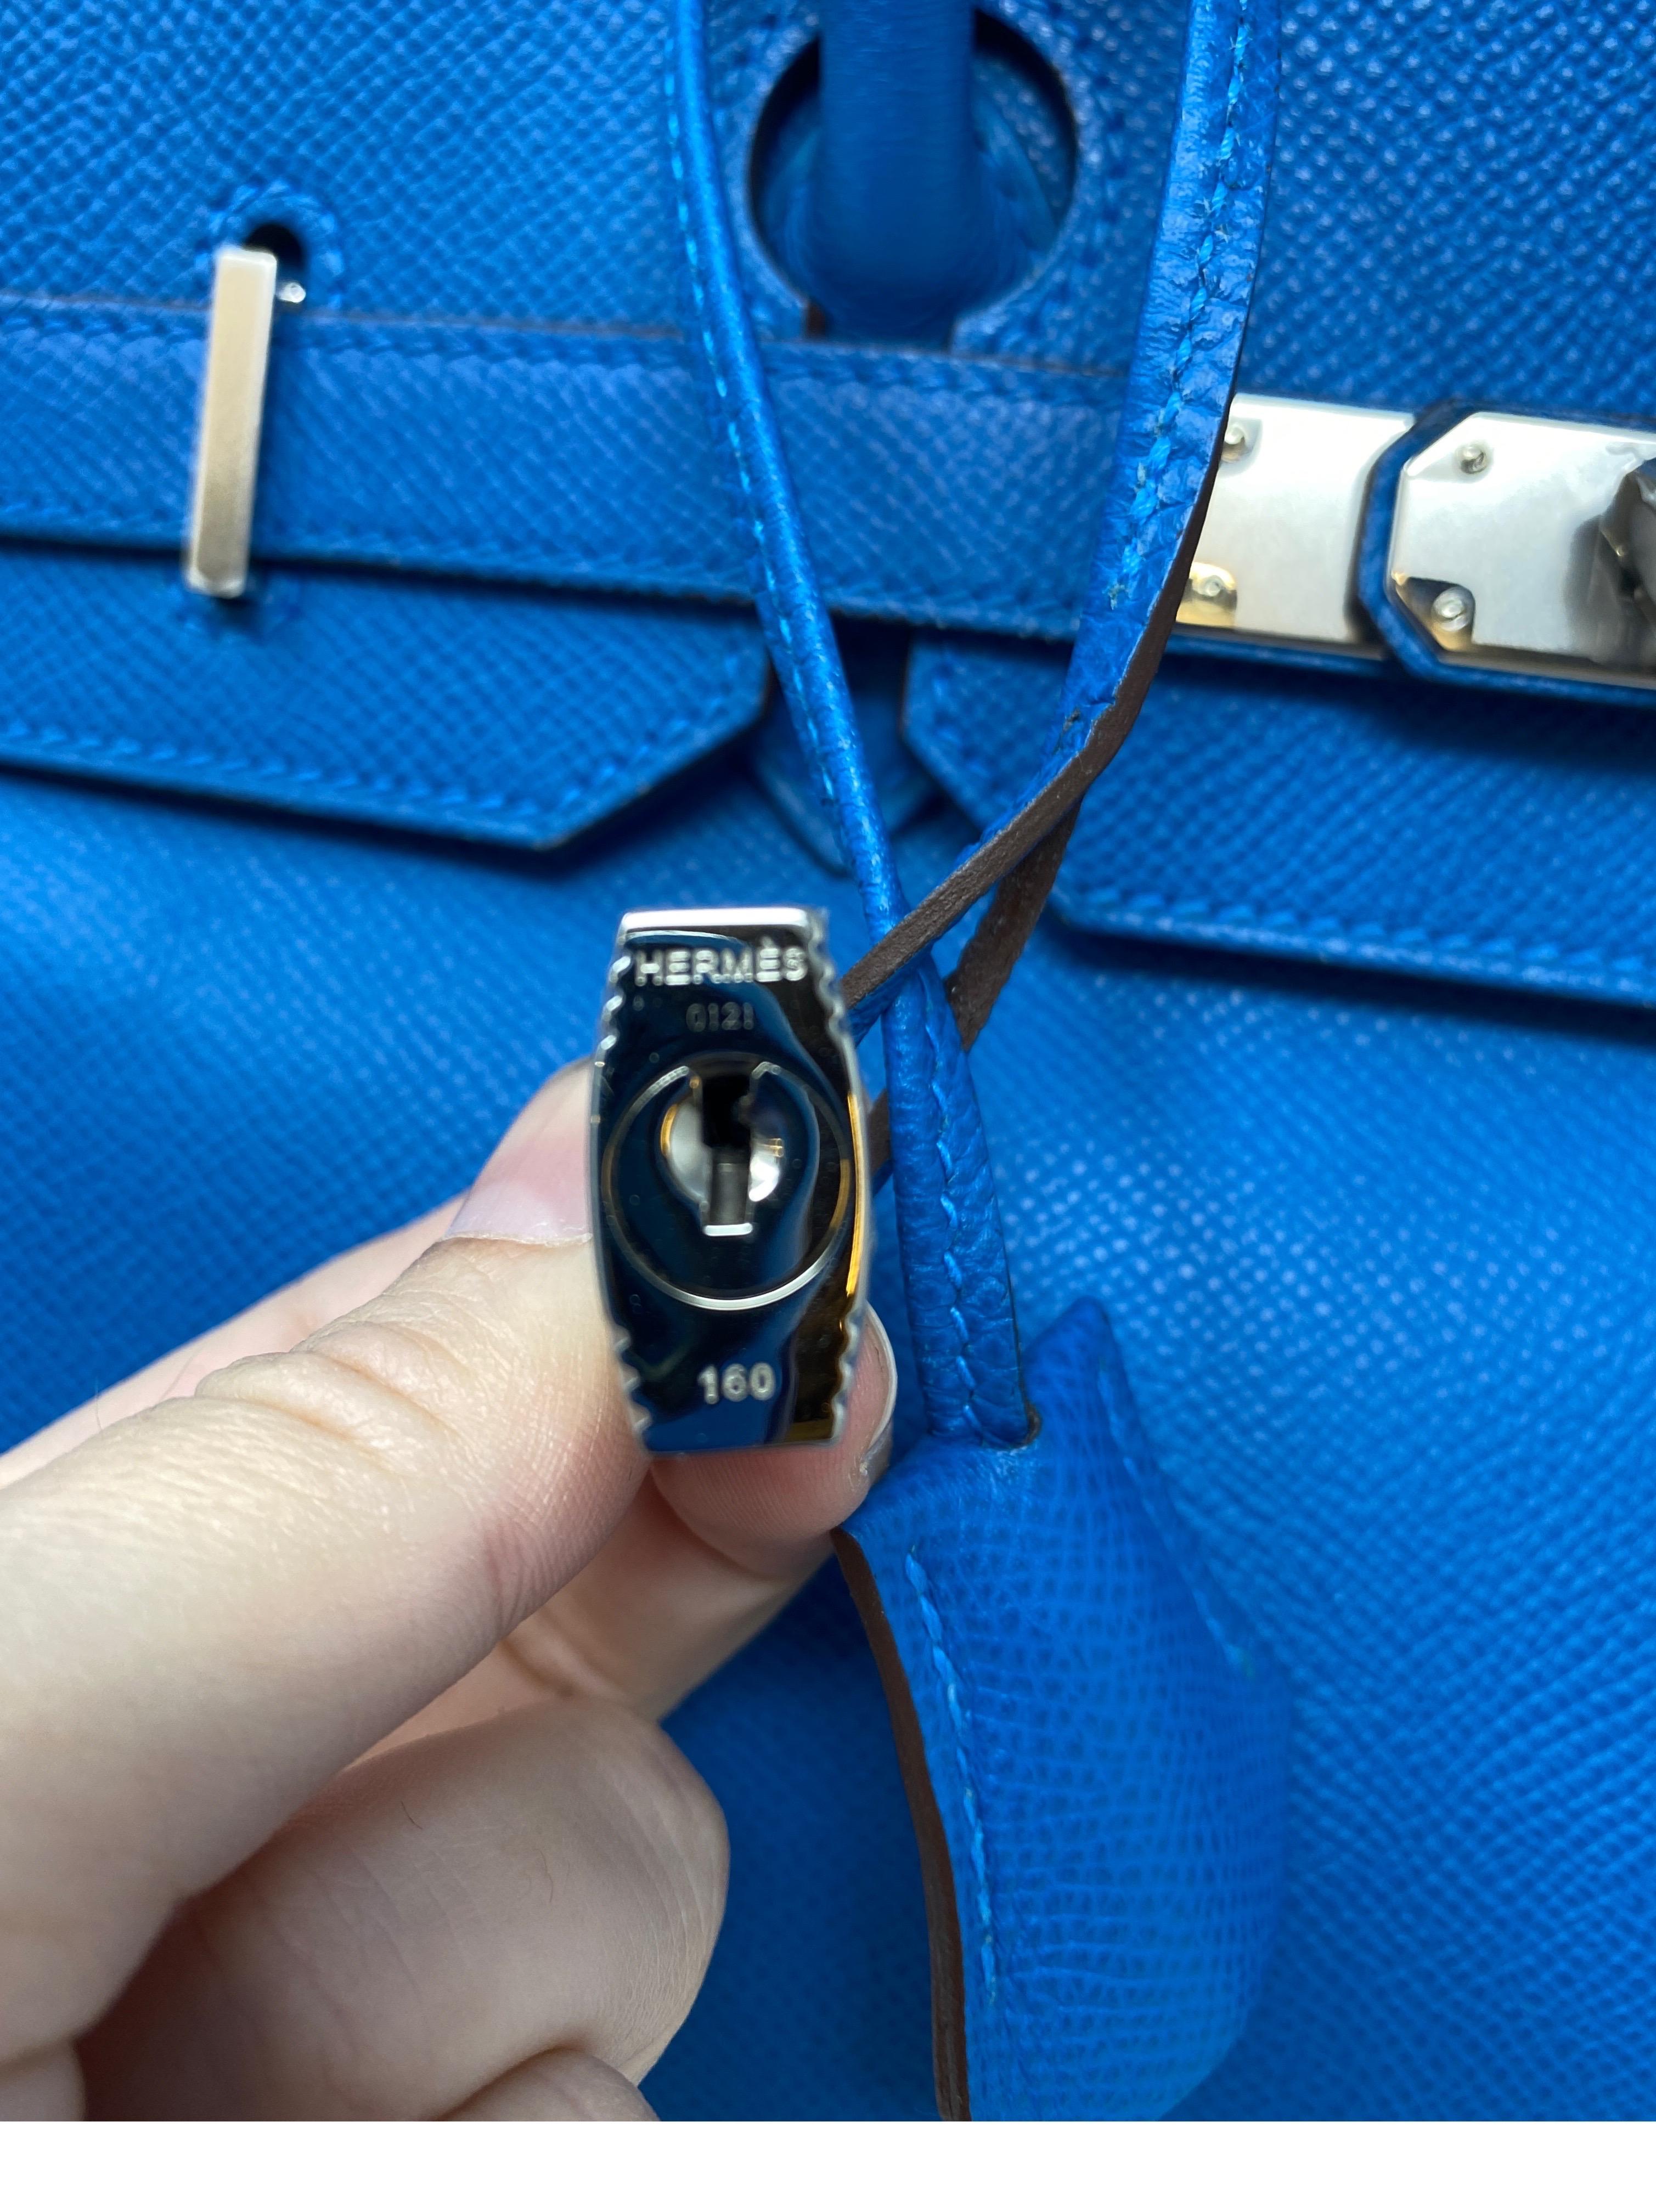 Hermes Blue Mykonos Birkin 35 Bag. Palladium hardware. Excellent condition. Looks like new. Gift ready. Beautiful vibrant blue color. Rare color. Desirable epsom leather. Includes clochette, lock, keys, and dust cover. Guaranteed authentic. 